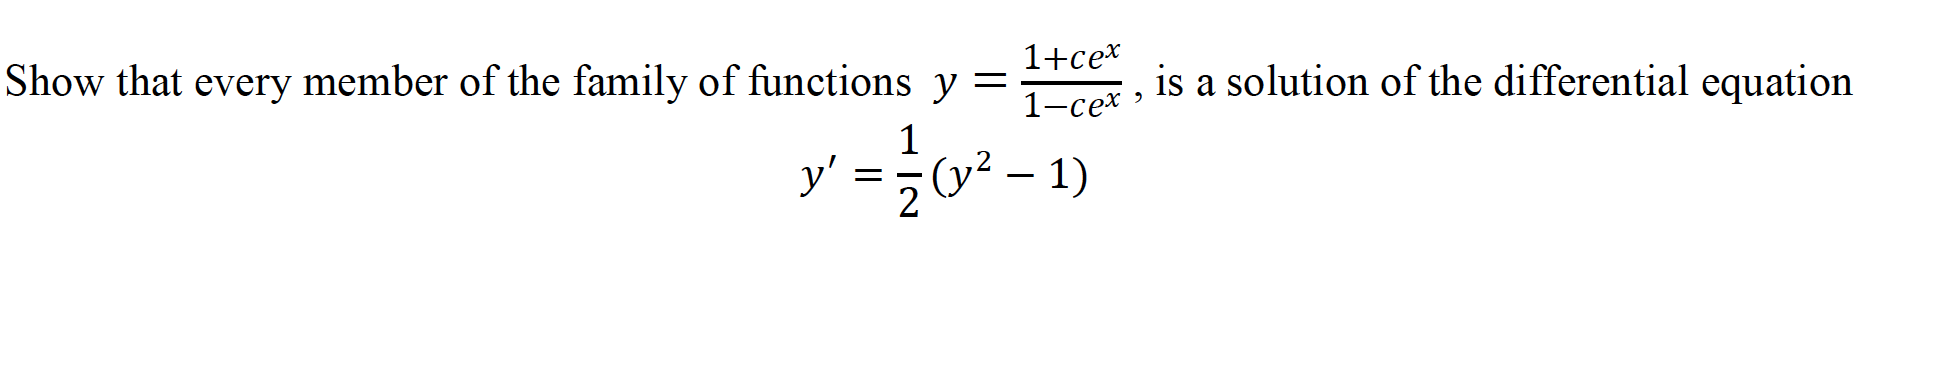 1+ce*
Show that every member of the family of functions y =
is a solution of the differential equation
1-се*
1
y' =;0² – 1)
2
